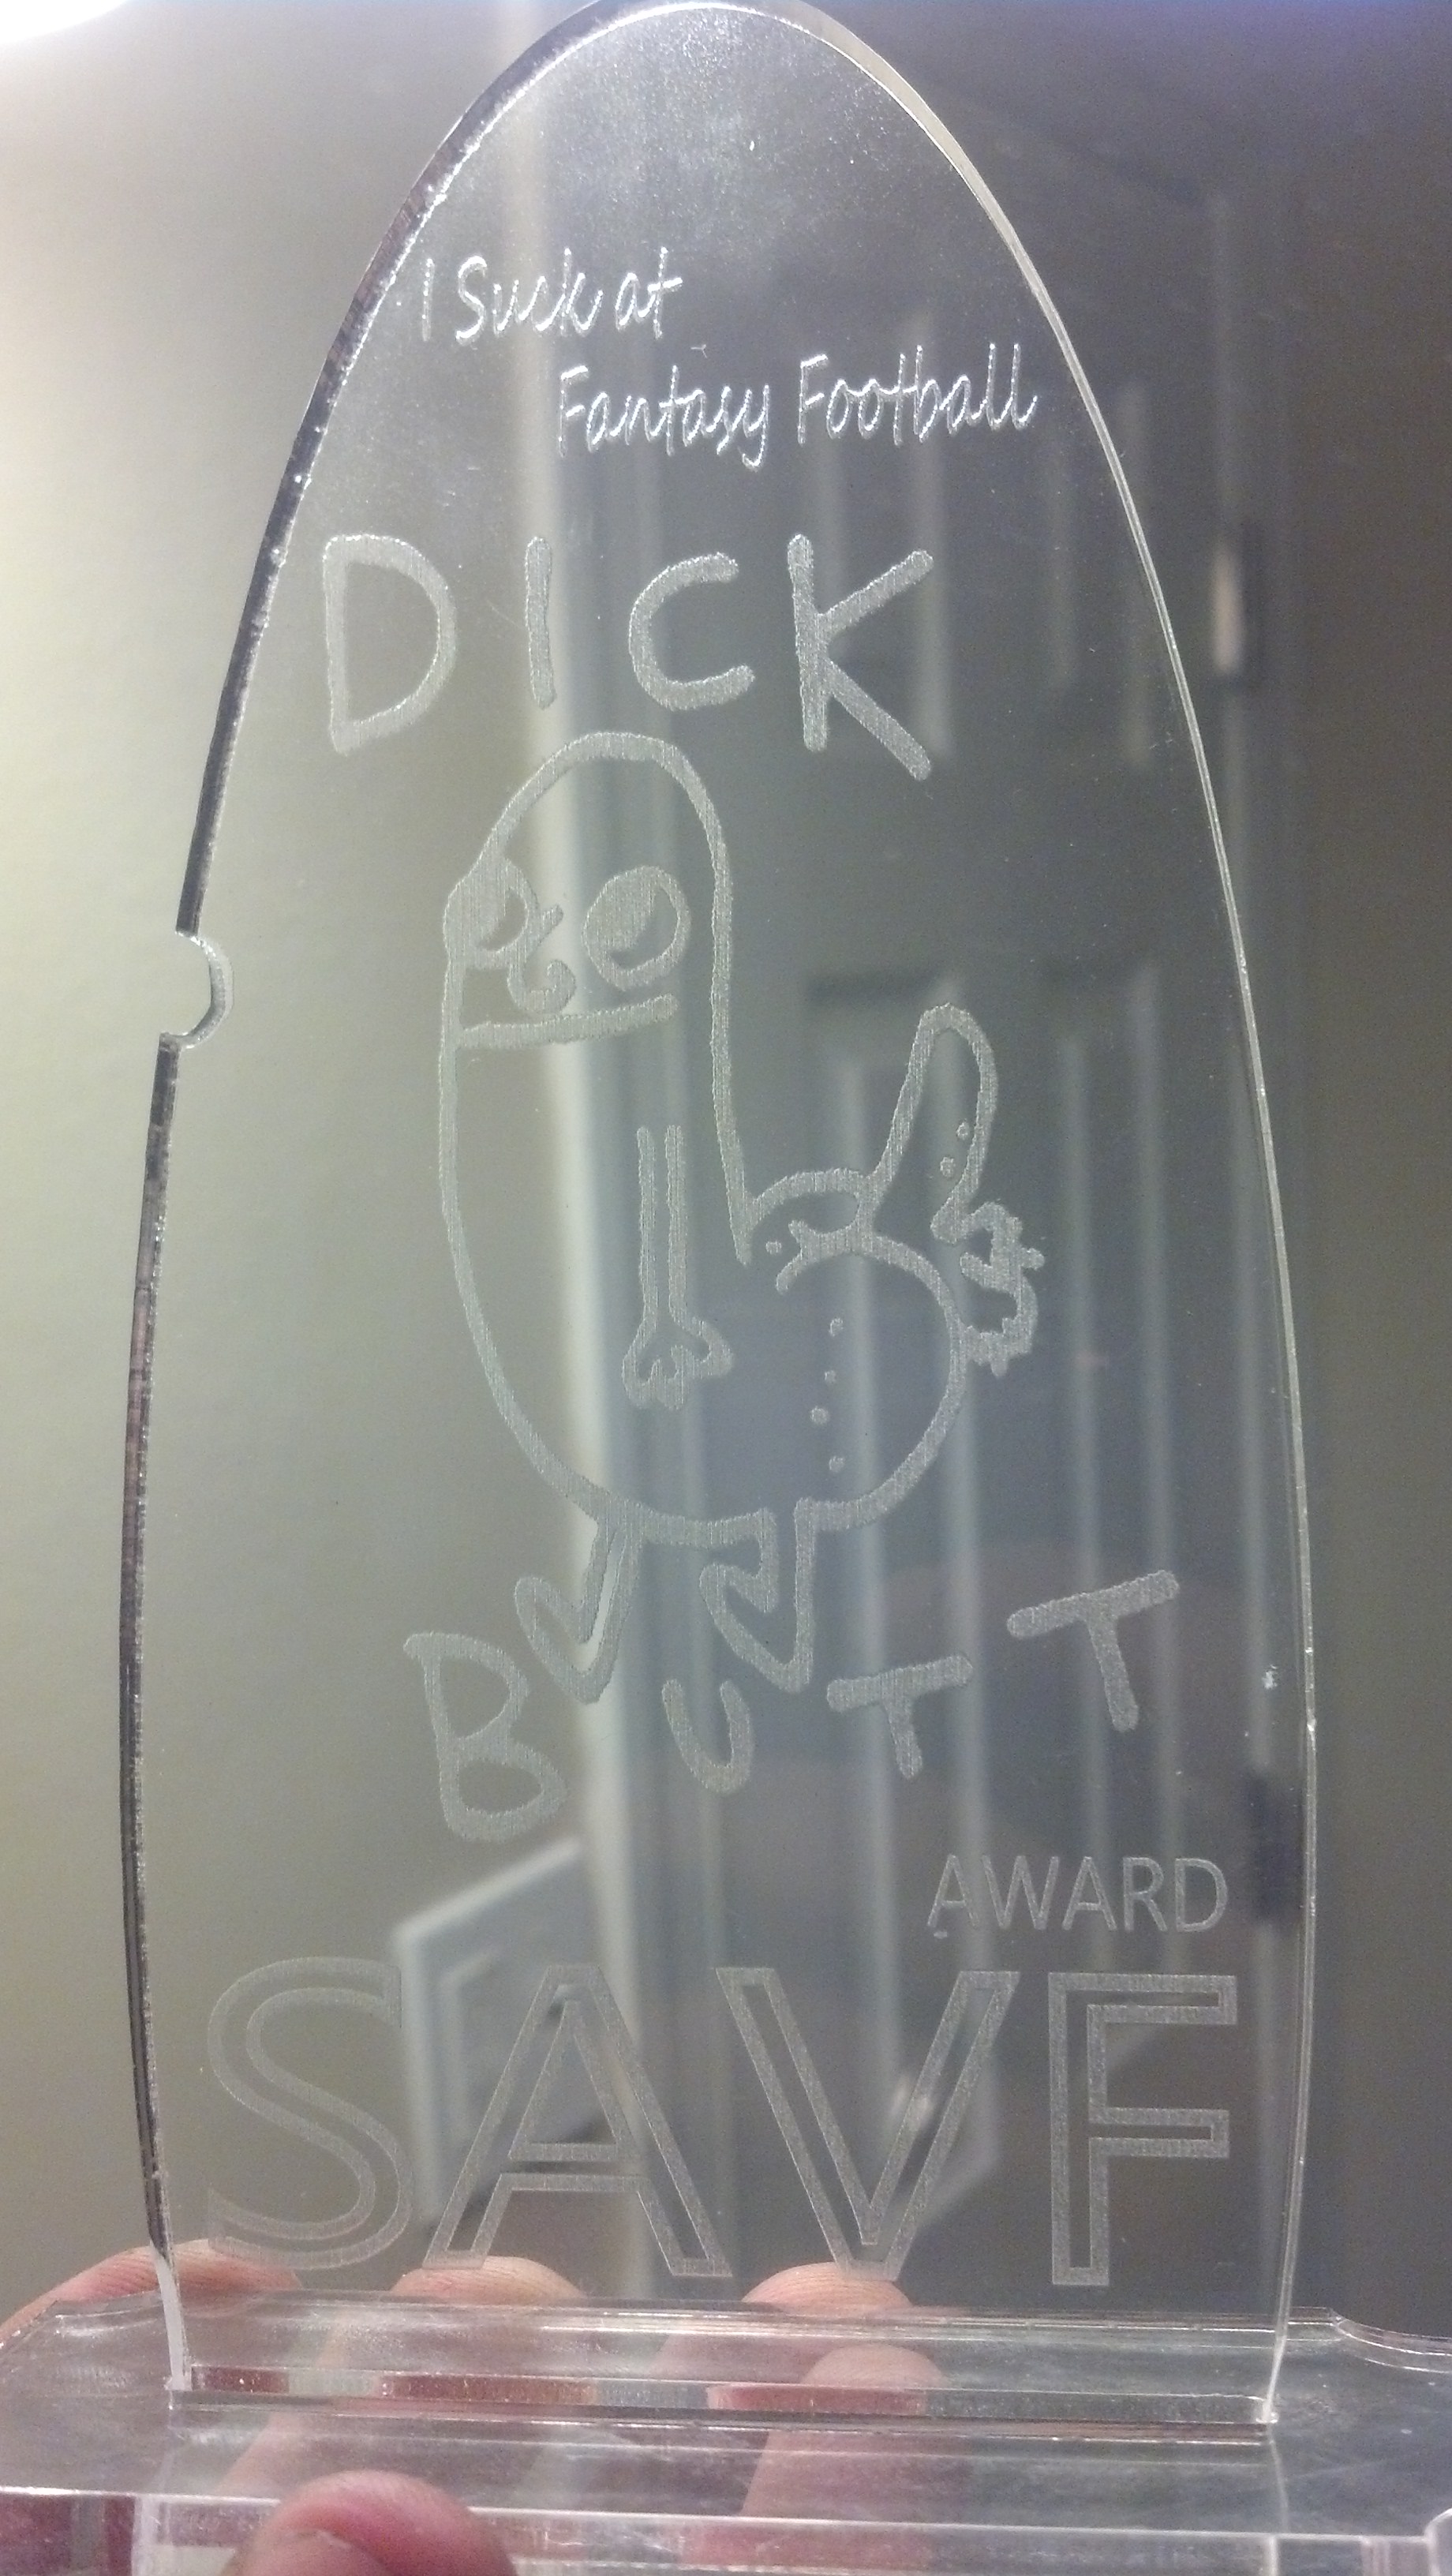 Presented to last place in my league of fantasy football this year comes the "Dickbutt Award". With it comes great responsibility, such as proudly displaying a last place license plate cover, naming your team next year Dickbutt2014 and answering to the name "Dickbutt" among the others in the league.